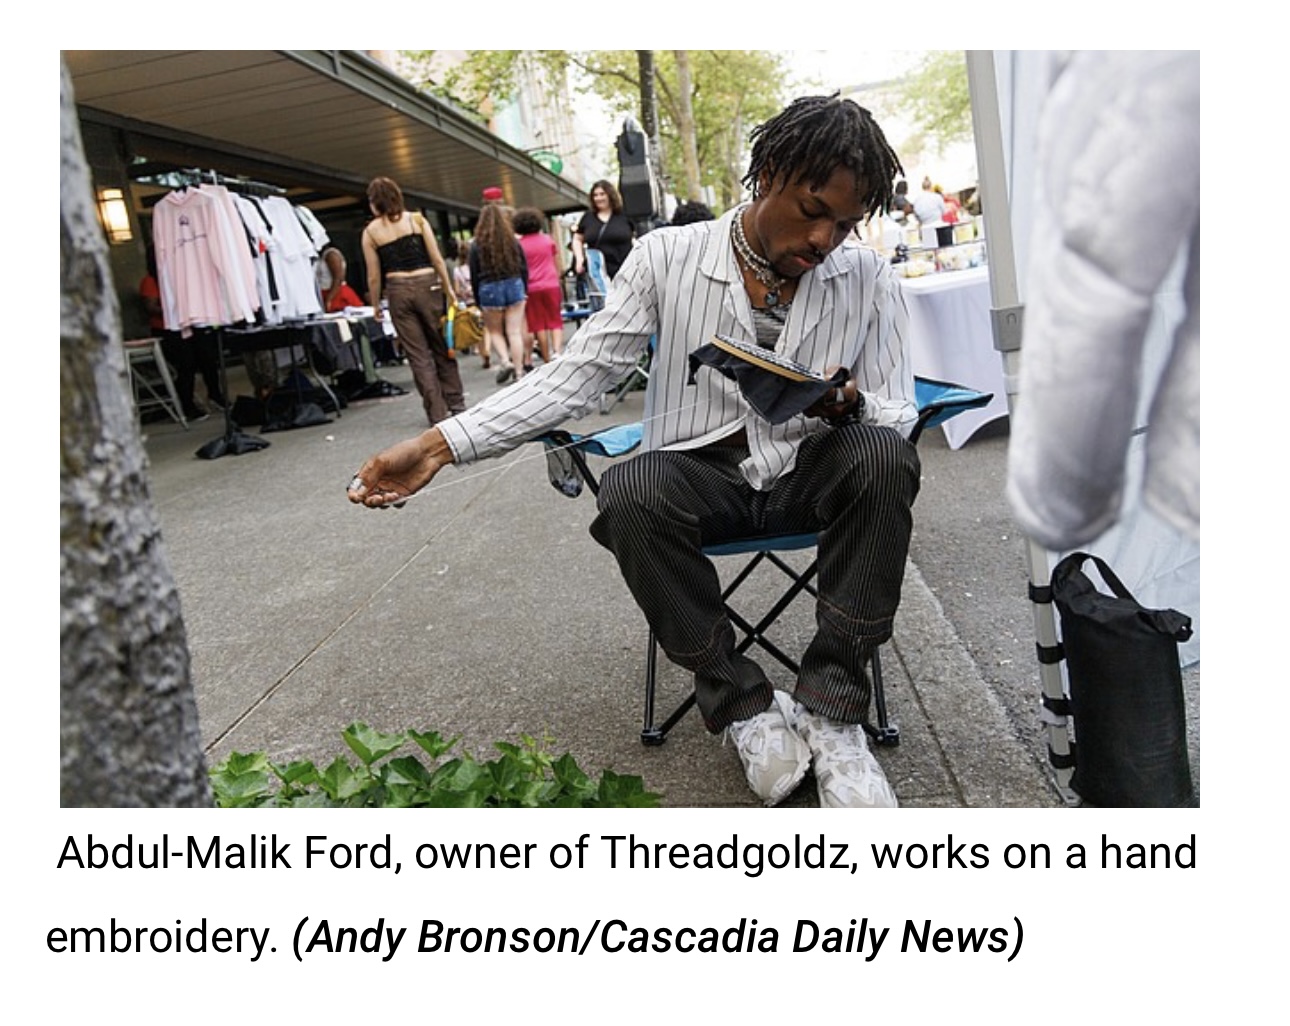 Abdul-Malik Ford working on a hand embroidery next to the ThreadGoldz booth a block party in Bellingham, WA.